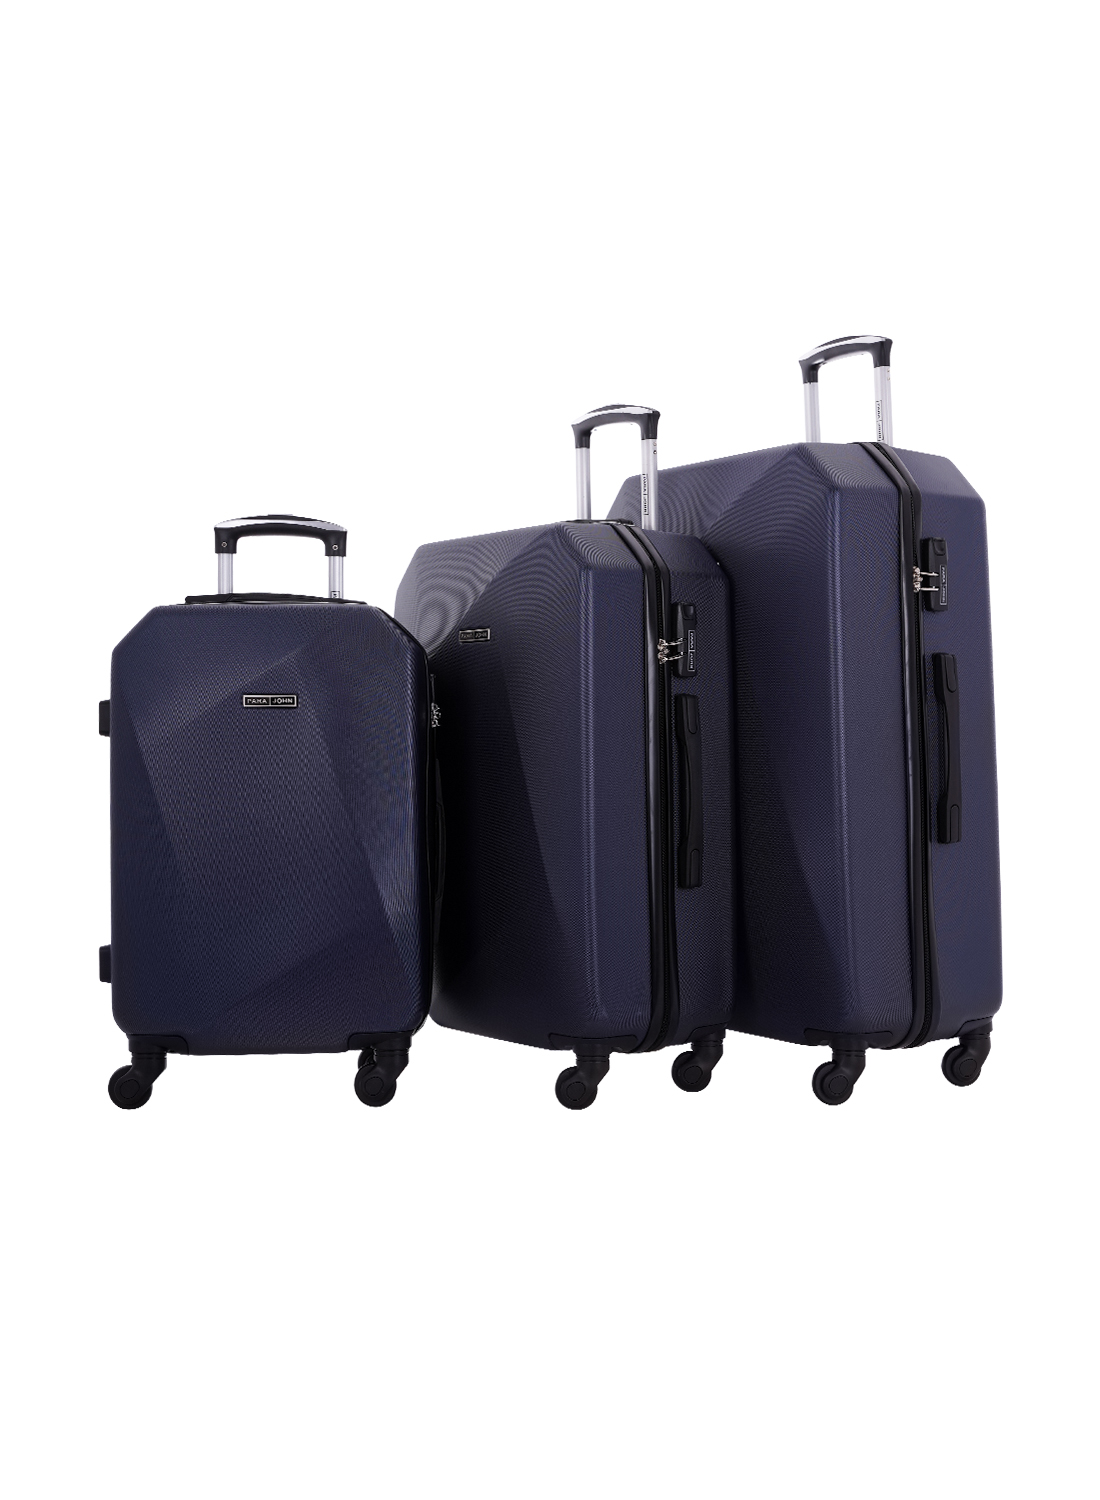 3-Piece Navy Color ABS Hard Side Trolley Bag Online